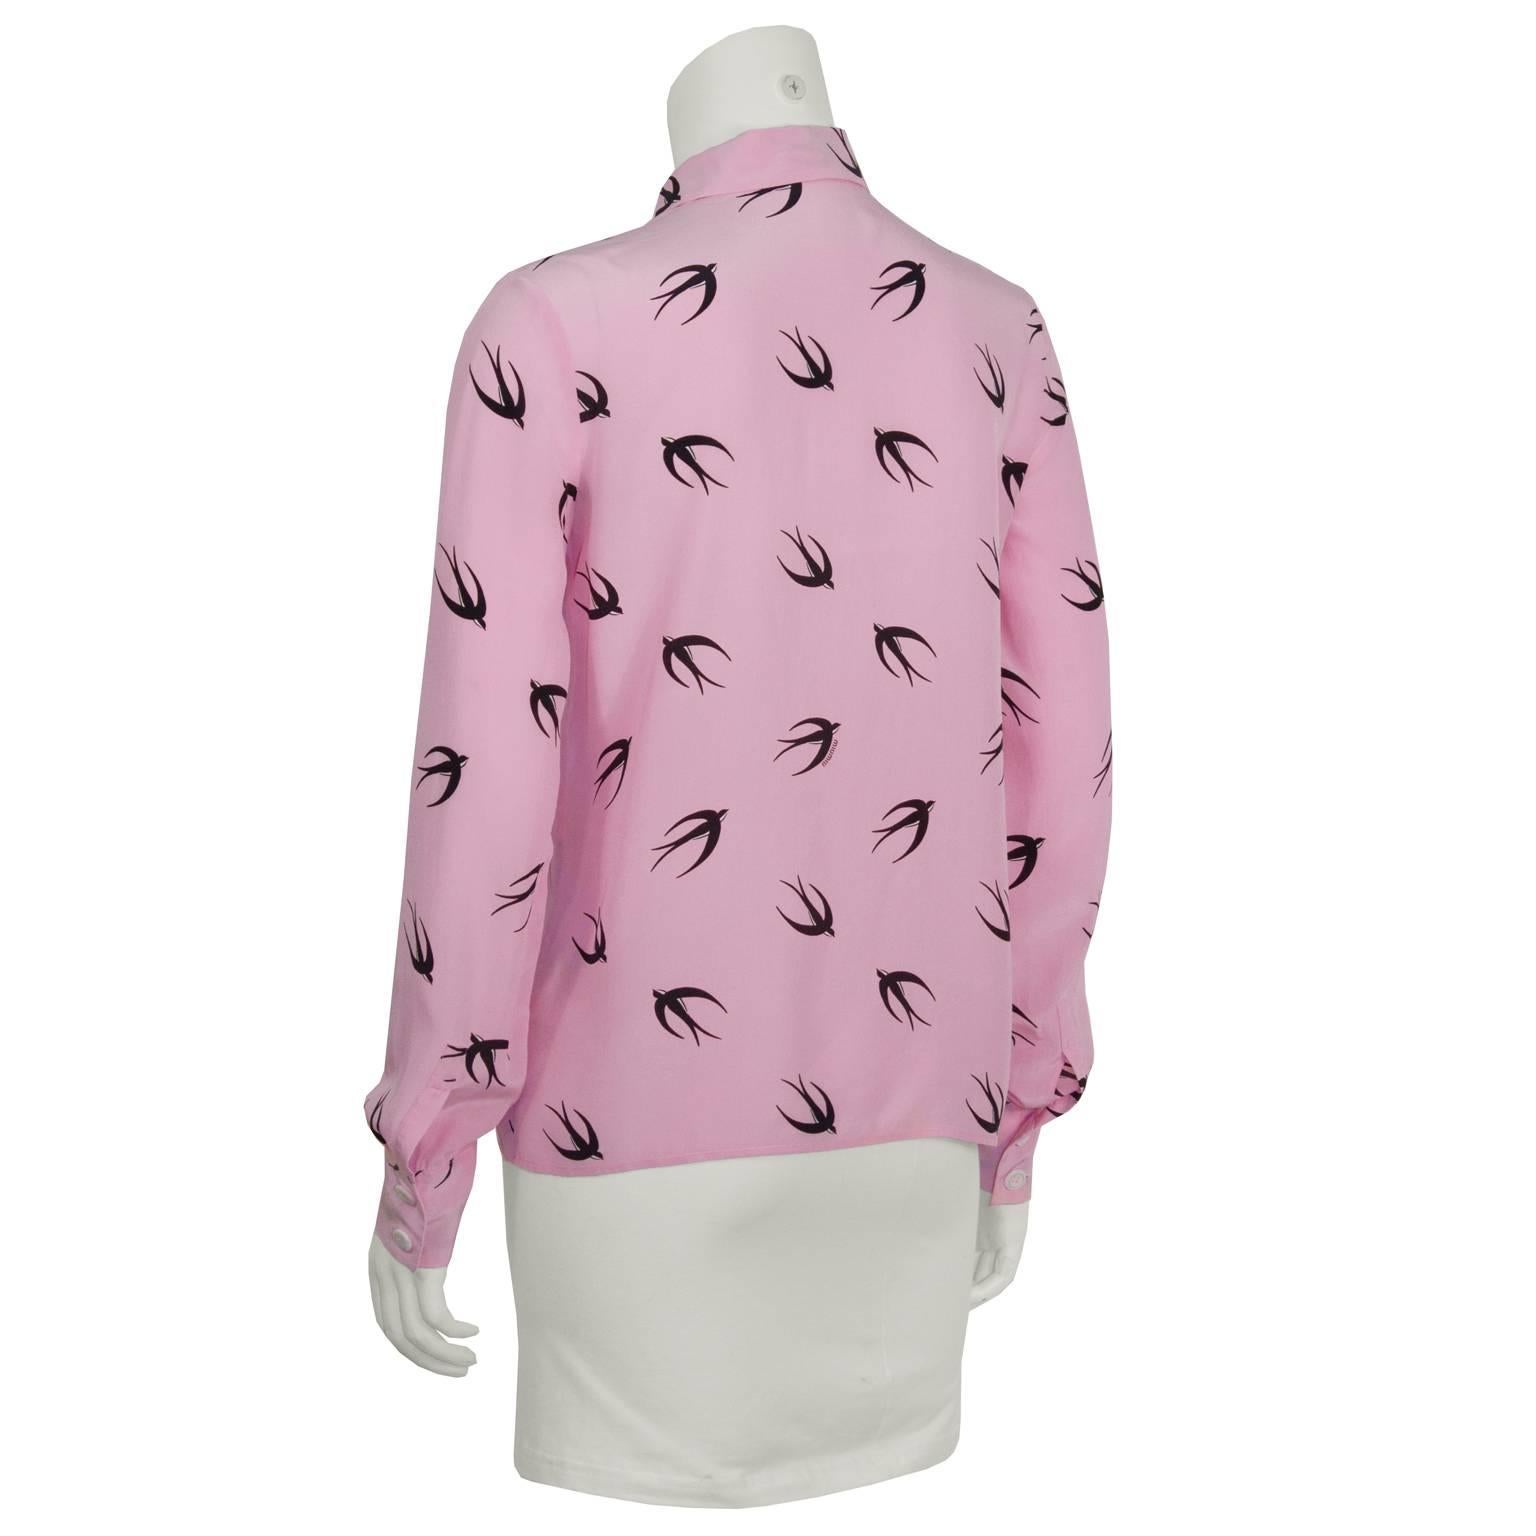 Adorable Miu Miu pink silk blouse with a black swallow print from the spring 2010 collection. Features a classic collar and front button closure. Two buttons at each cuff. Excellent condition. Fits like a US 2.